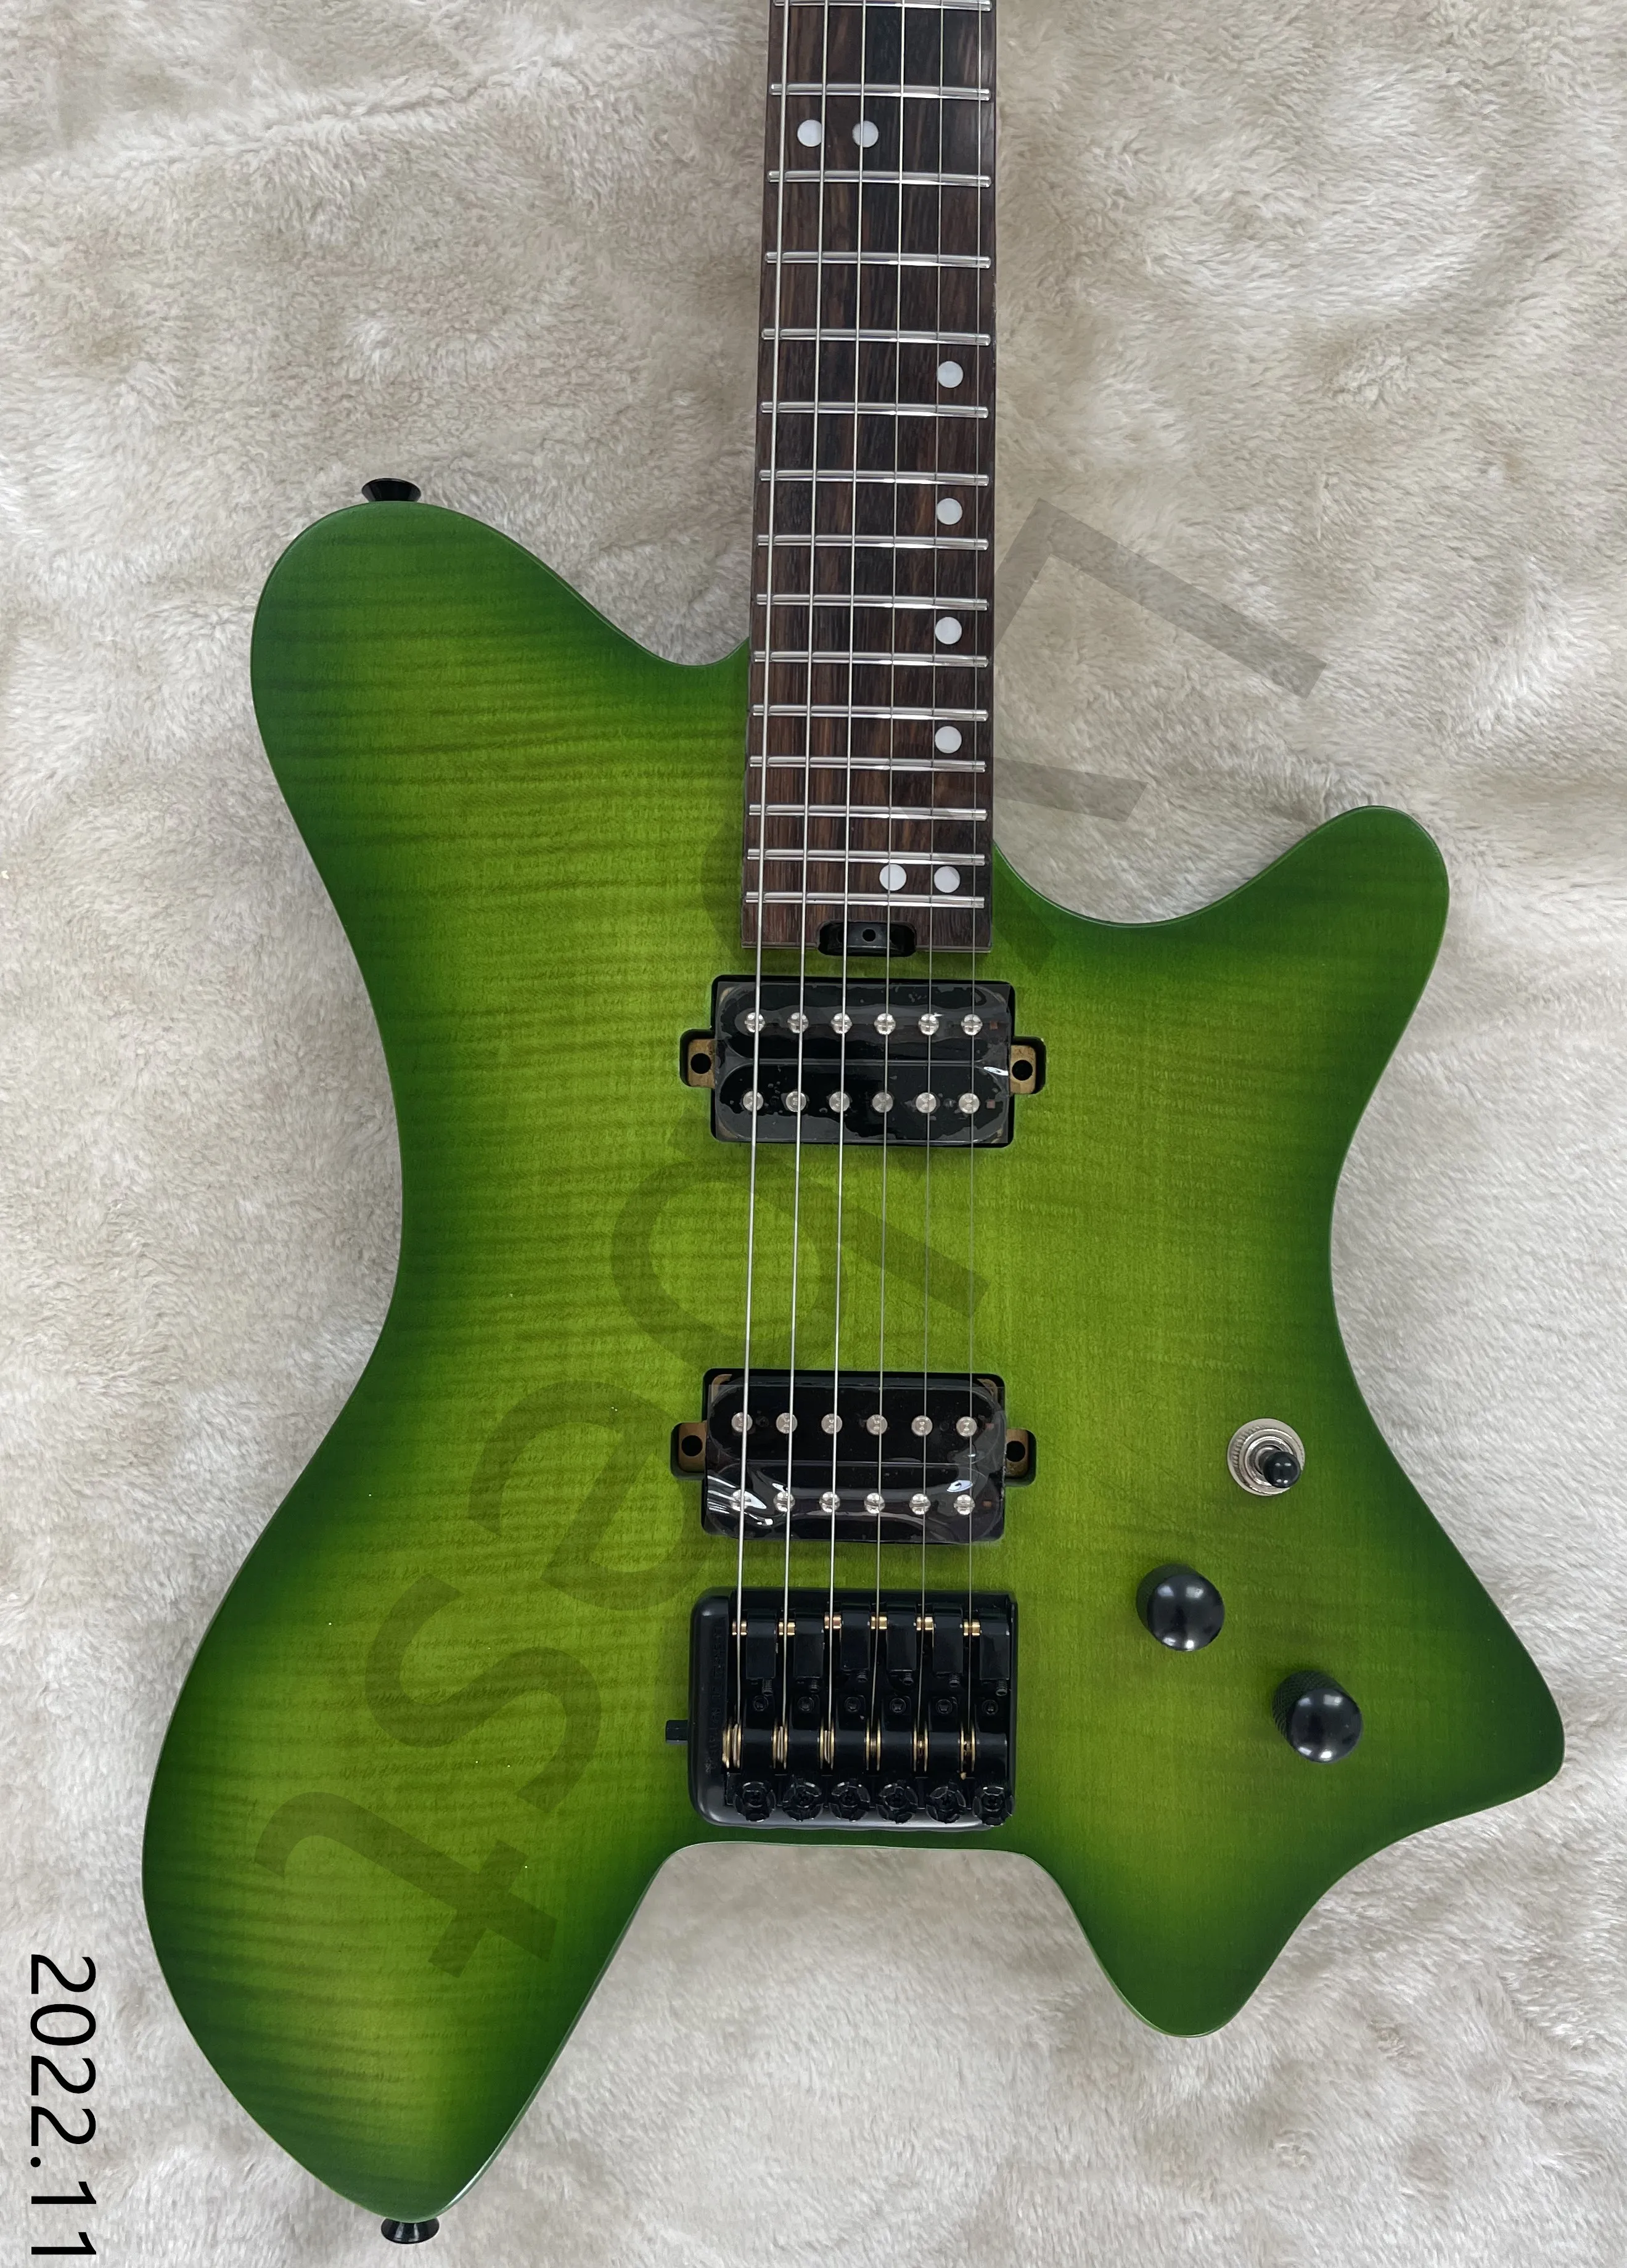 IN STOCKING Headless Electric 6 Strings Traveler Guitar Or 24 Fret Guitar ASH Body With FLAME TOP GREEN BURST Color Maple